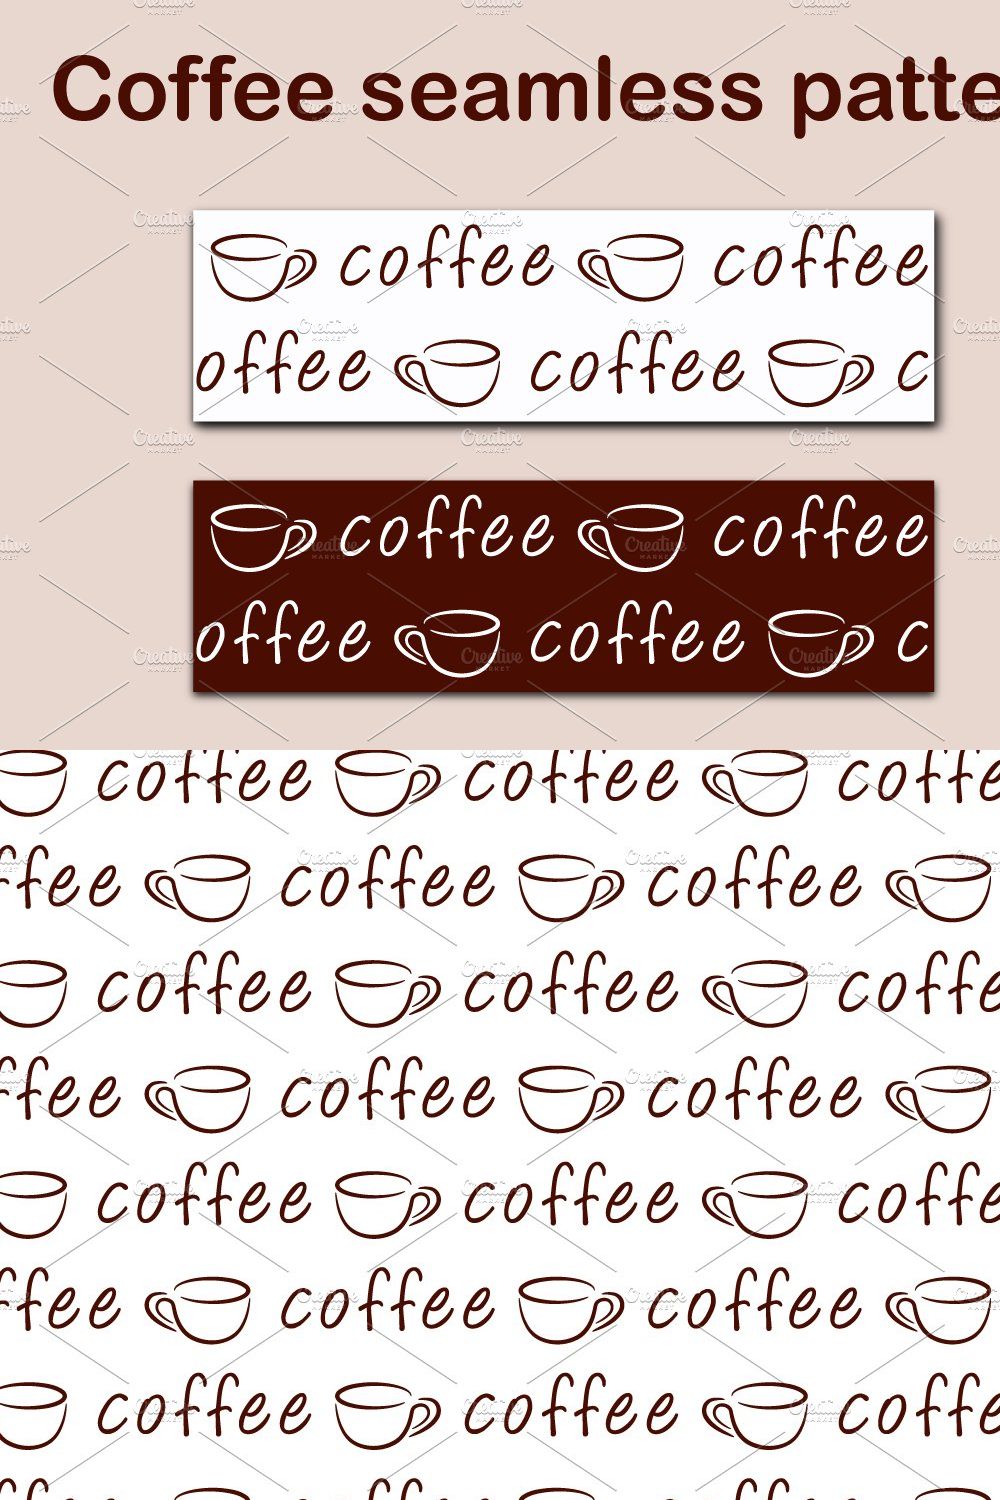 Coffee seamless pattern pinterest preview image.